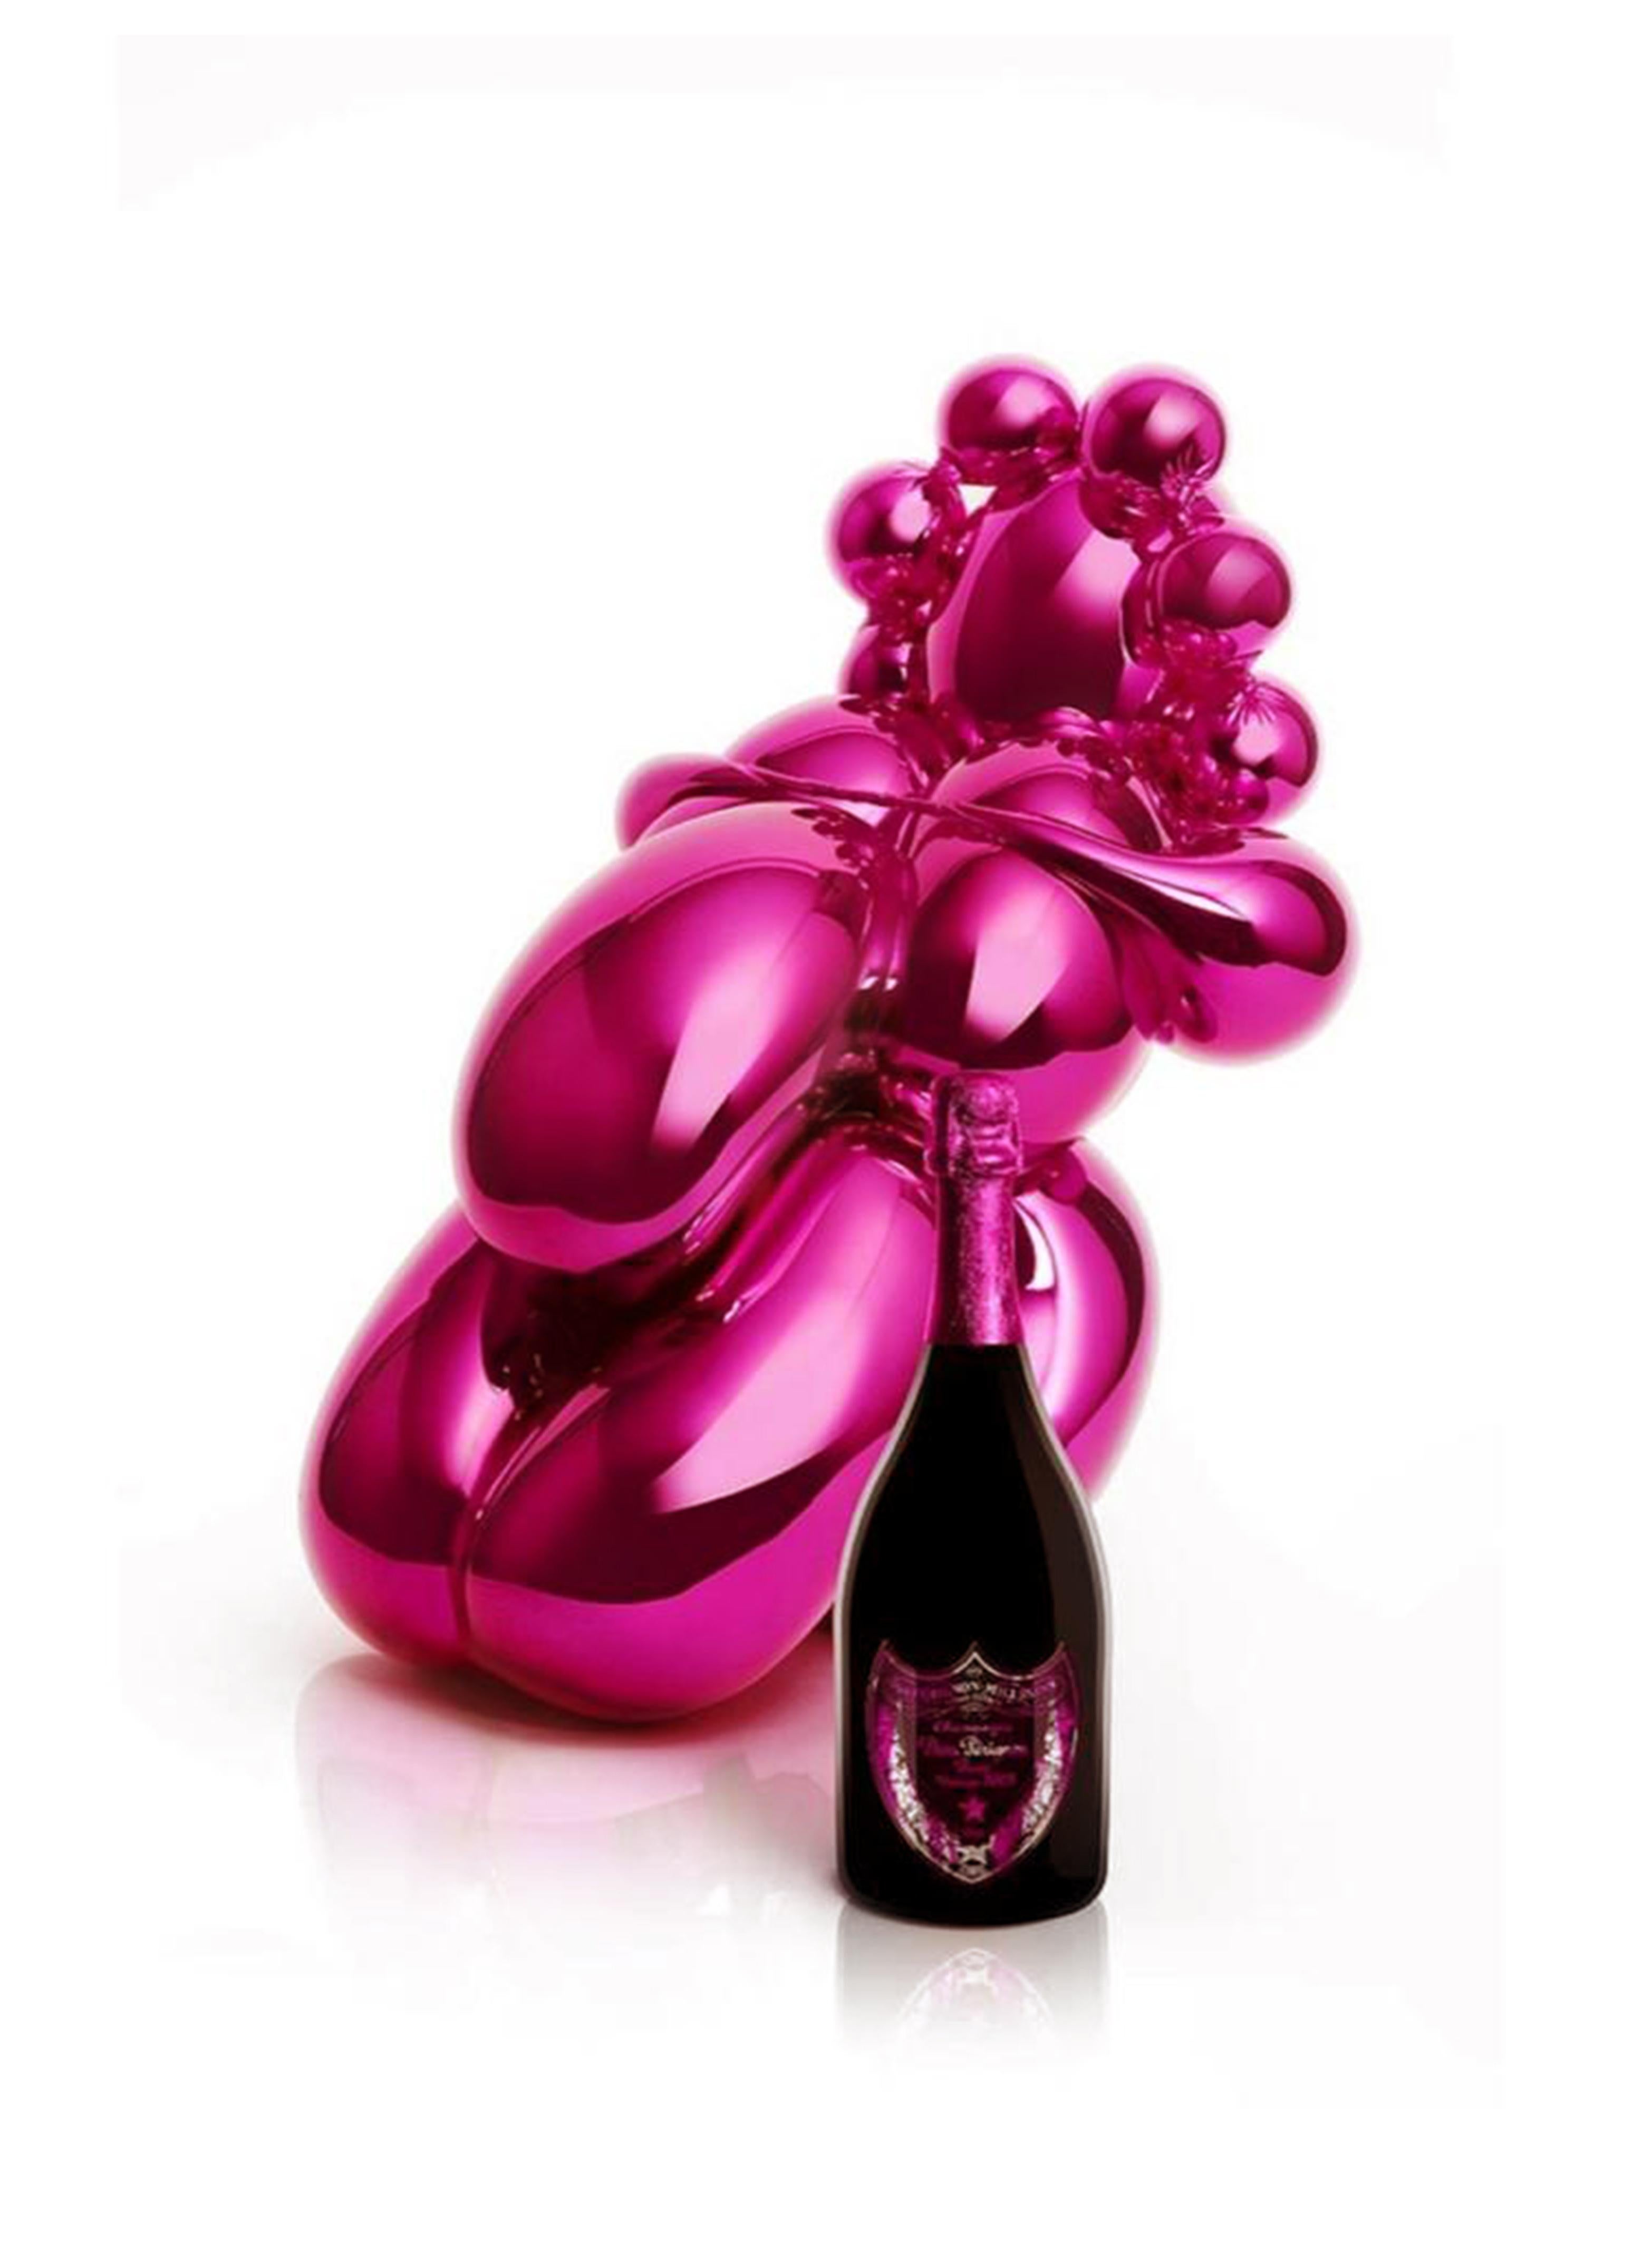 The 'Balloon Venus' by Jeff Koons is a hand polished polyurethane resin sculpture, created in 2013. The piece is impressed with the artist's name and title "Dom Pérignon BALLOON VENUS by Jeff Koons" on the suede interior lining, the Balloon Venus